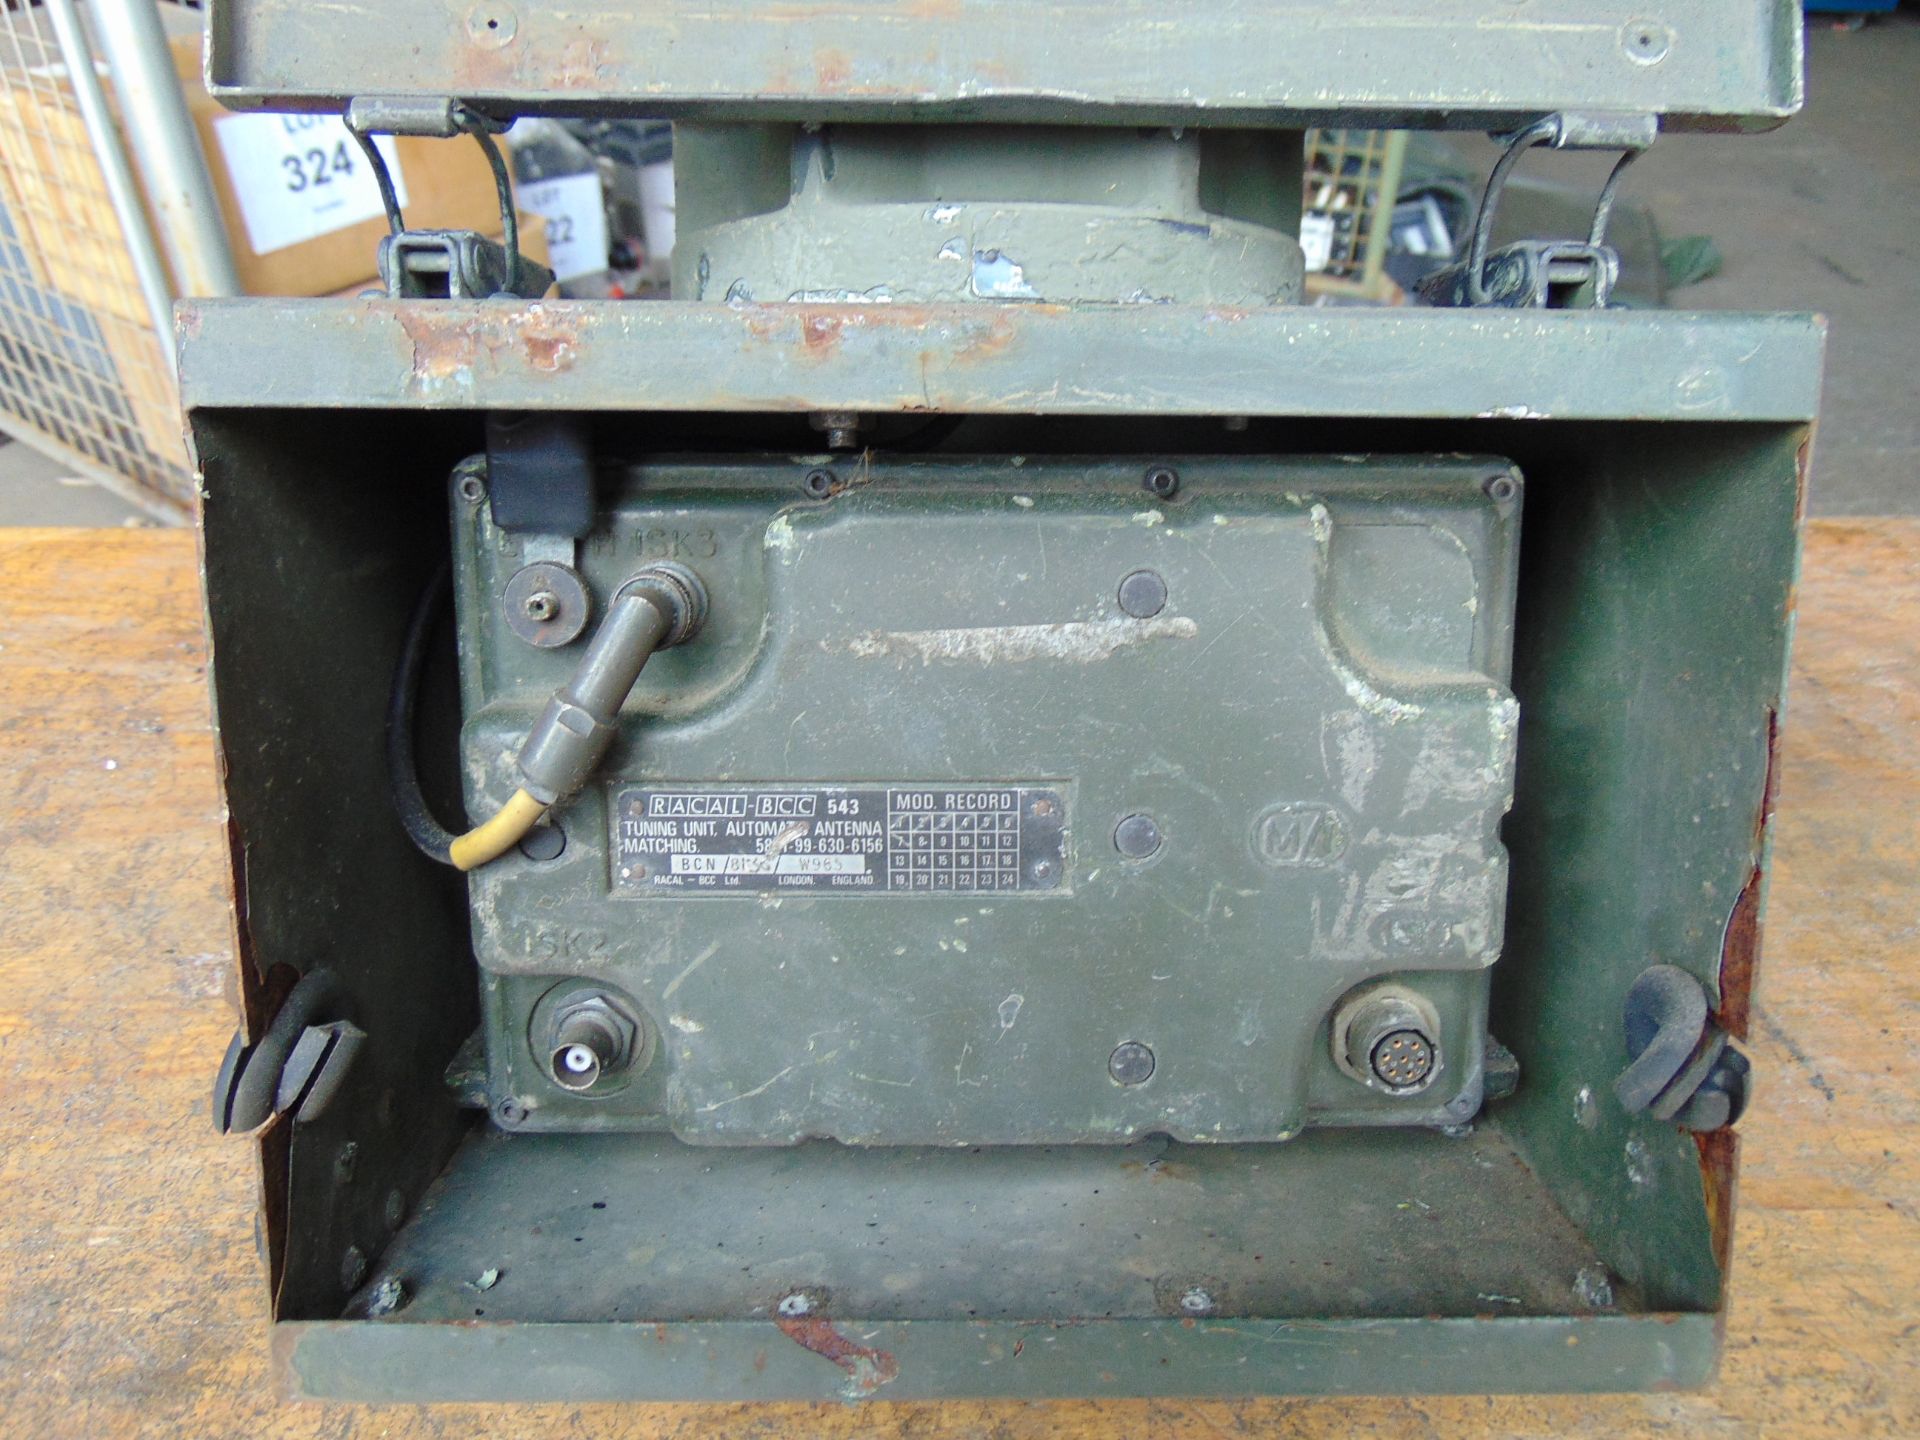 Clansman Land Rover Wing Box c/w Tuner and Antenna Base Getting Hard to Find - Image 3 of 5